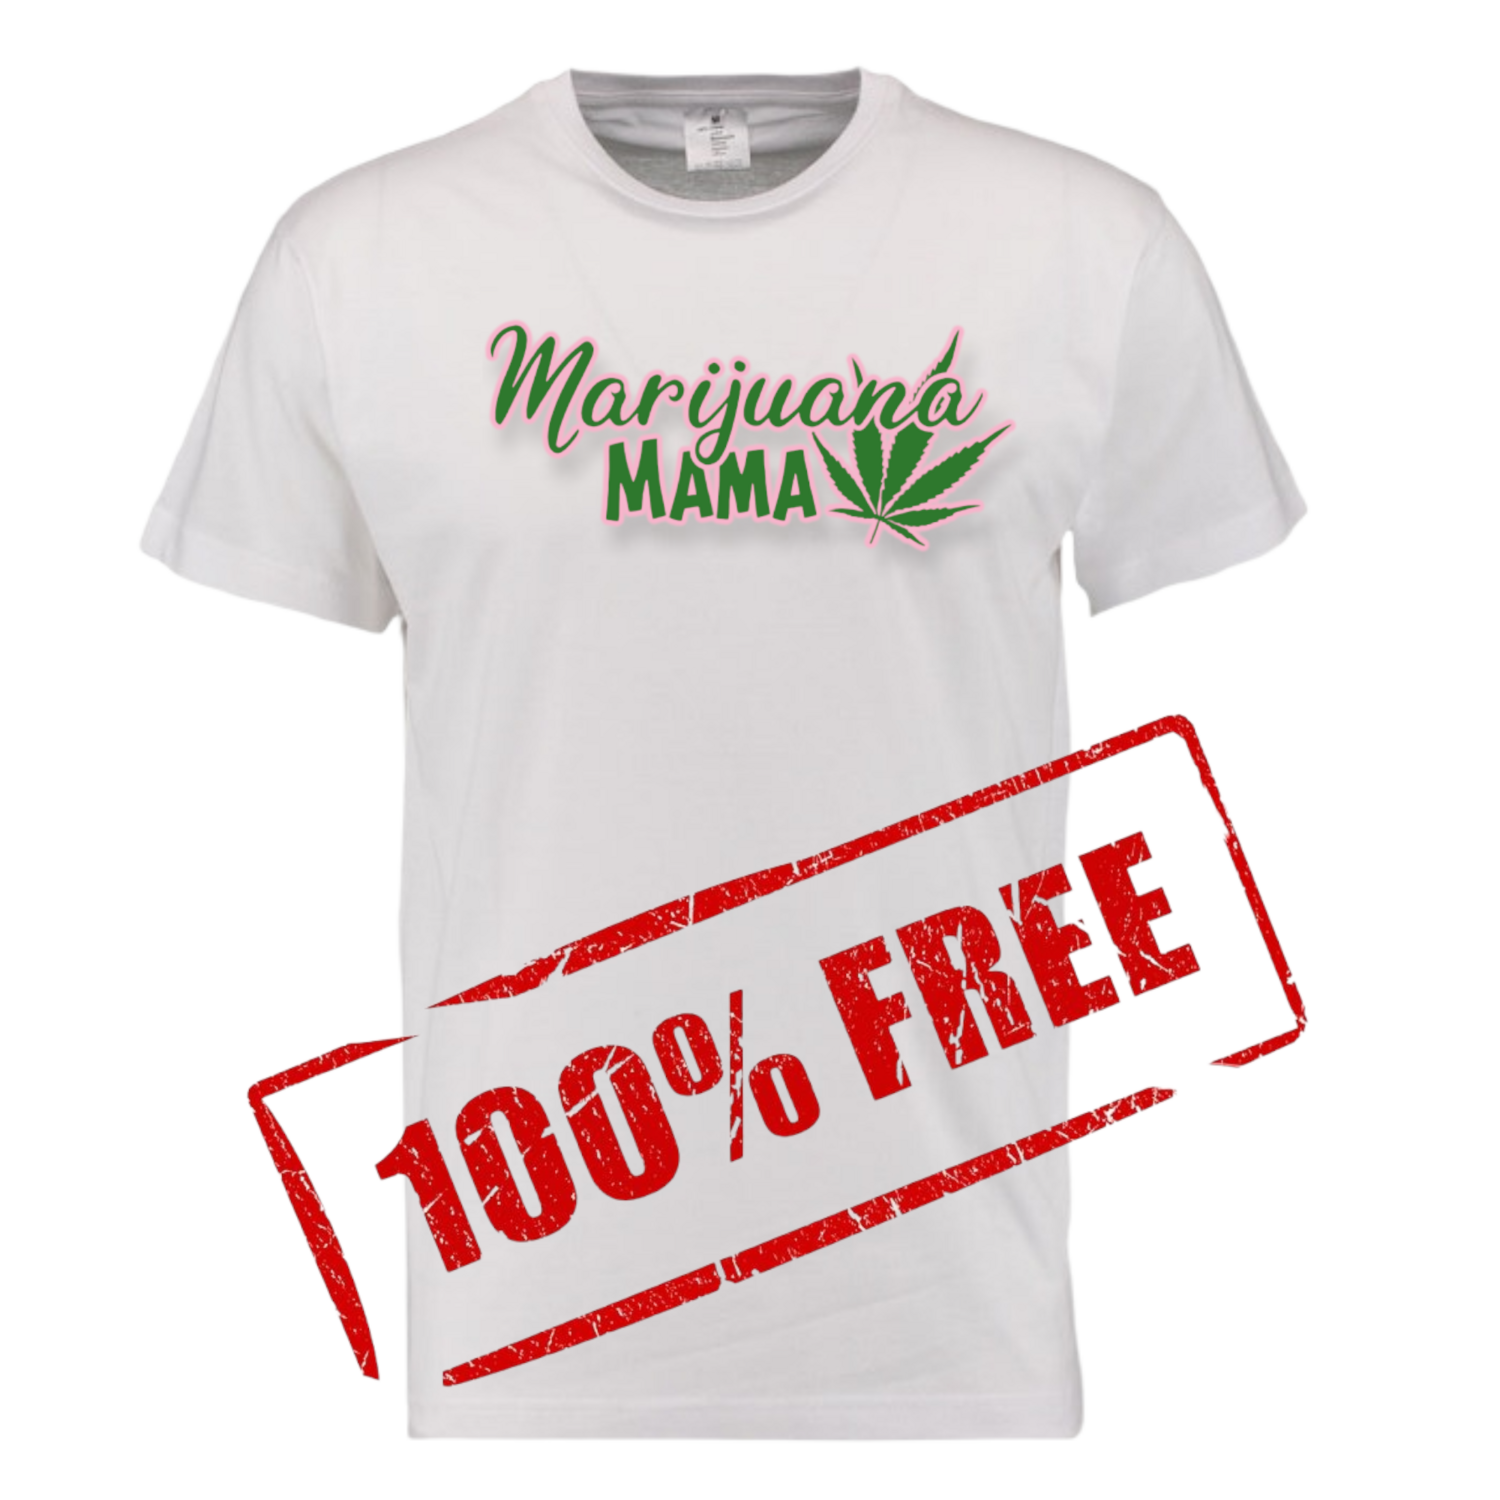 FREE T SHIRT mother's  mamma  EDITION 
Only small to xl is free anything bigger  is a lil extra